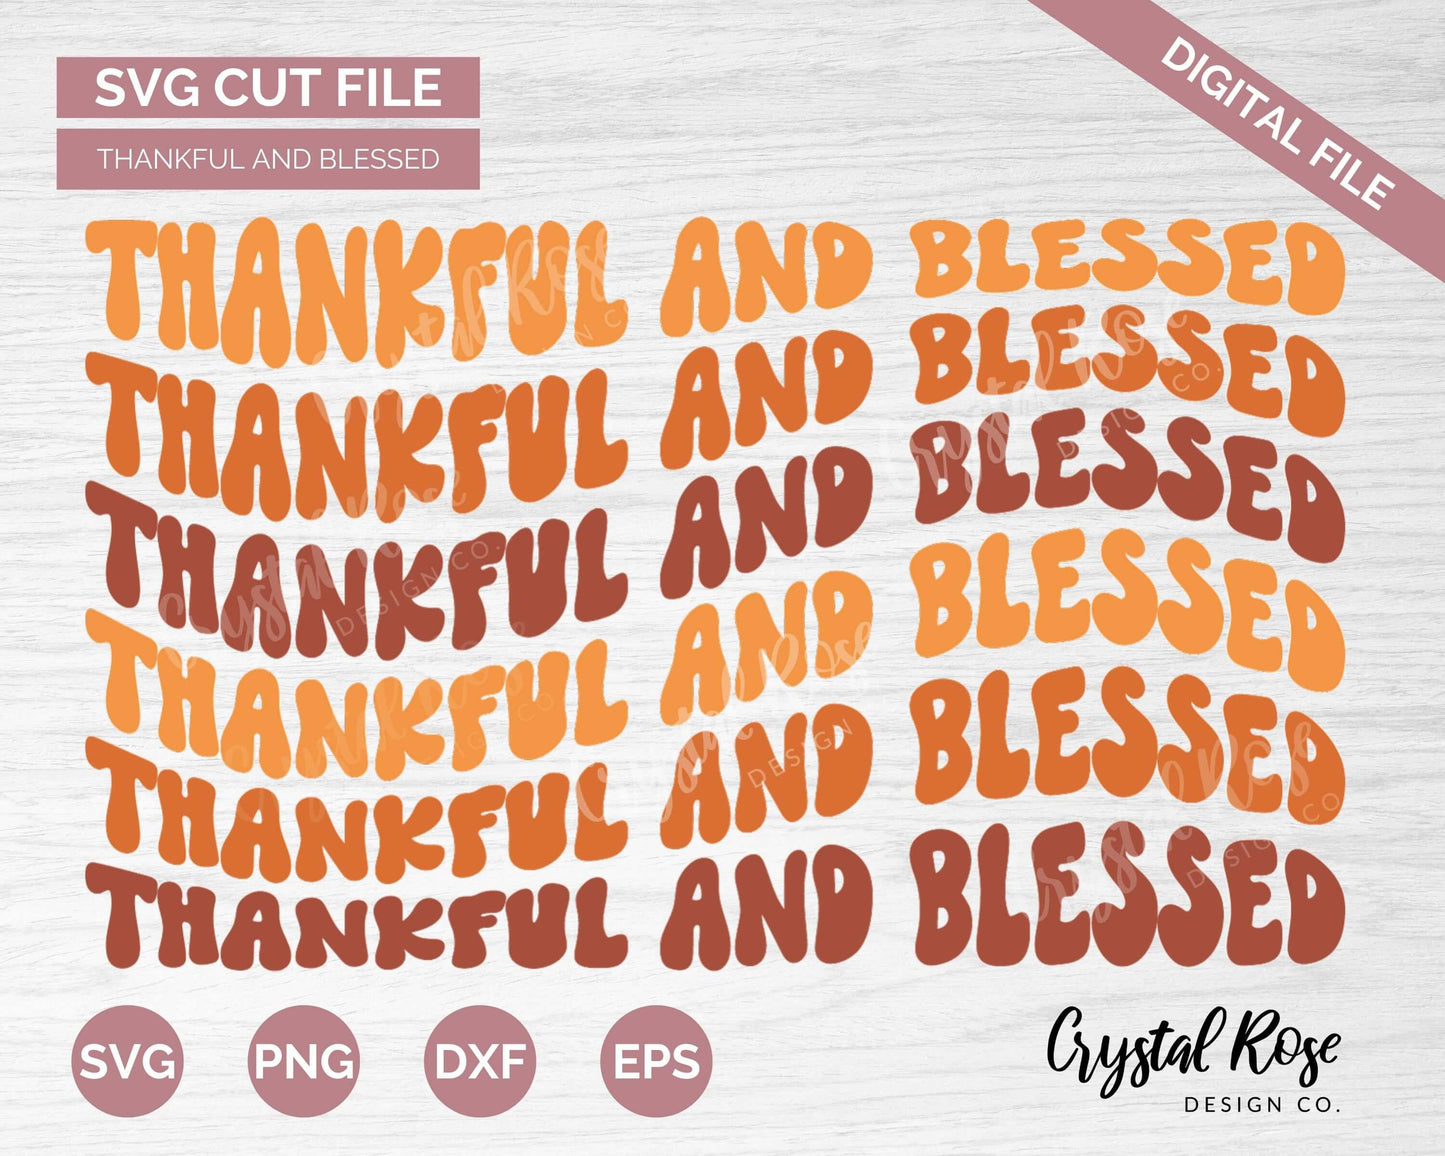 Thankful and Blessed SVG, Fall SVG, Digital Download, Cricut, Silhouette, Glowforge (includes svg/png/dxf/eps)